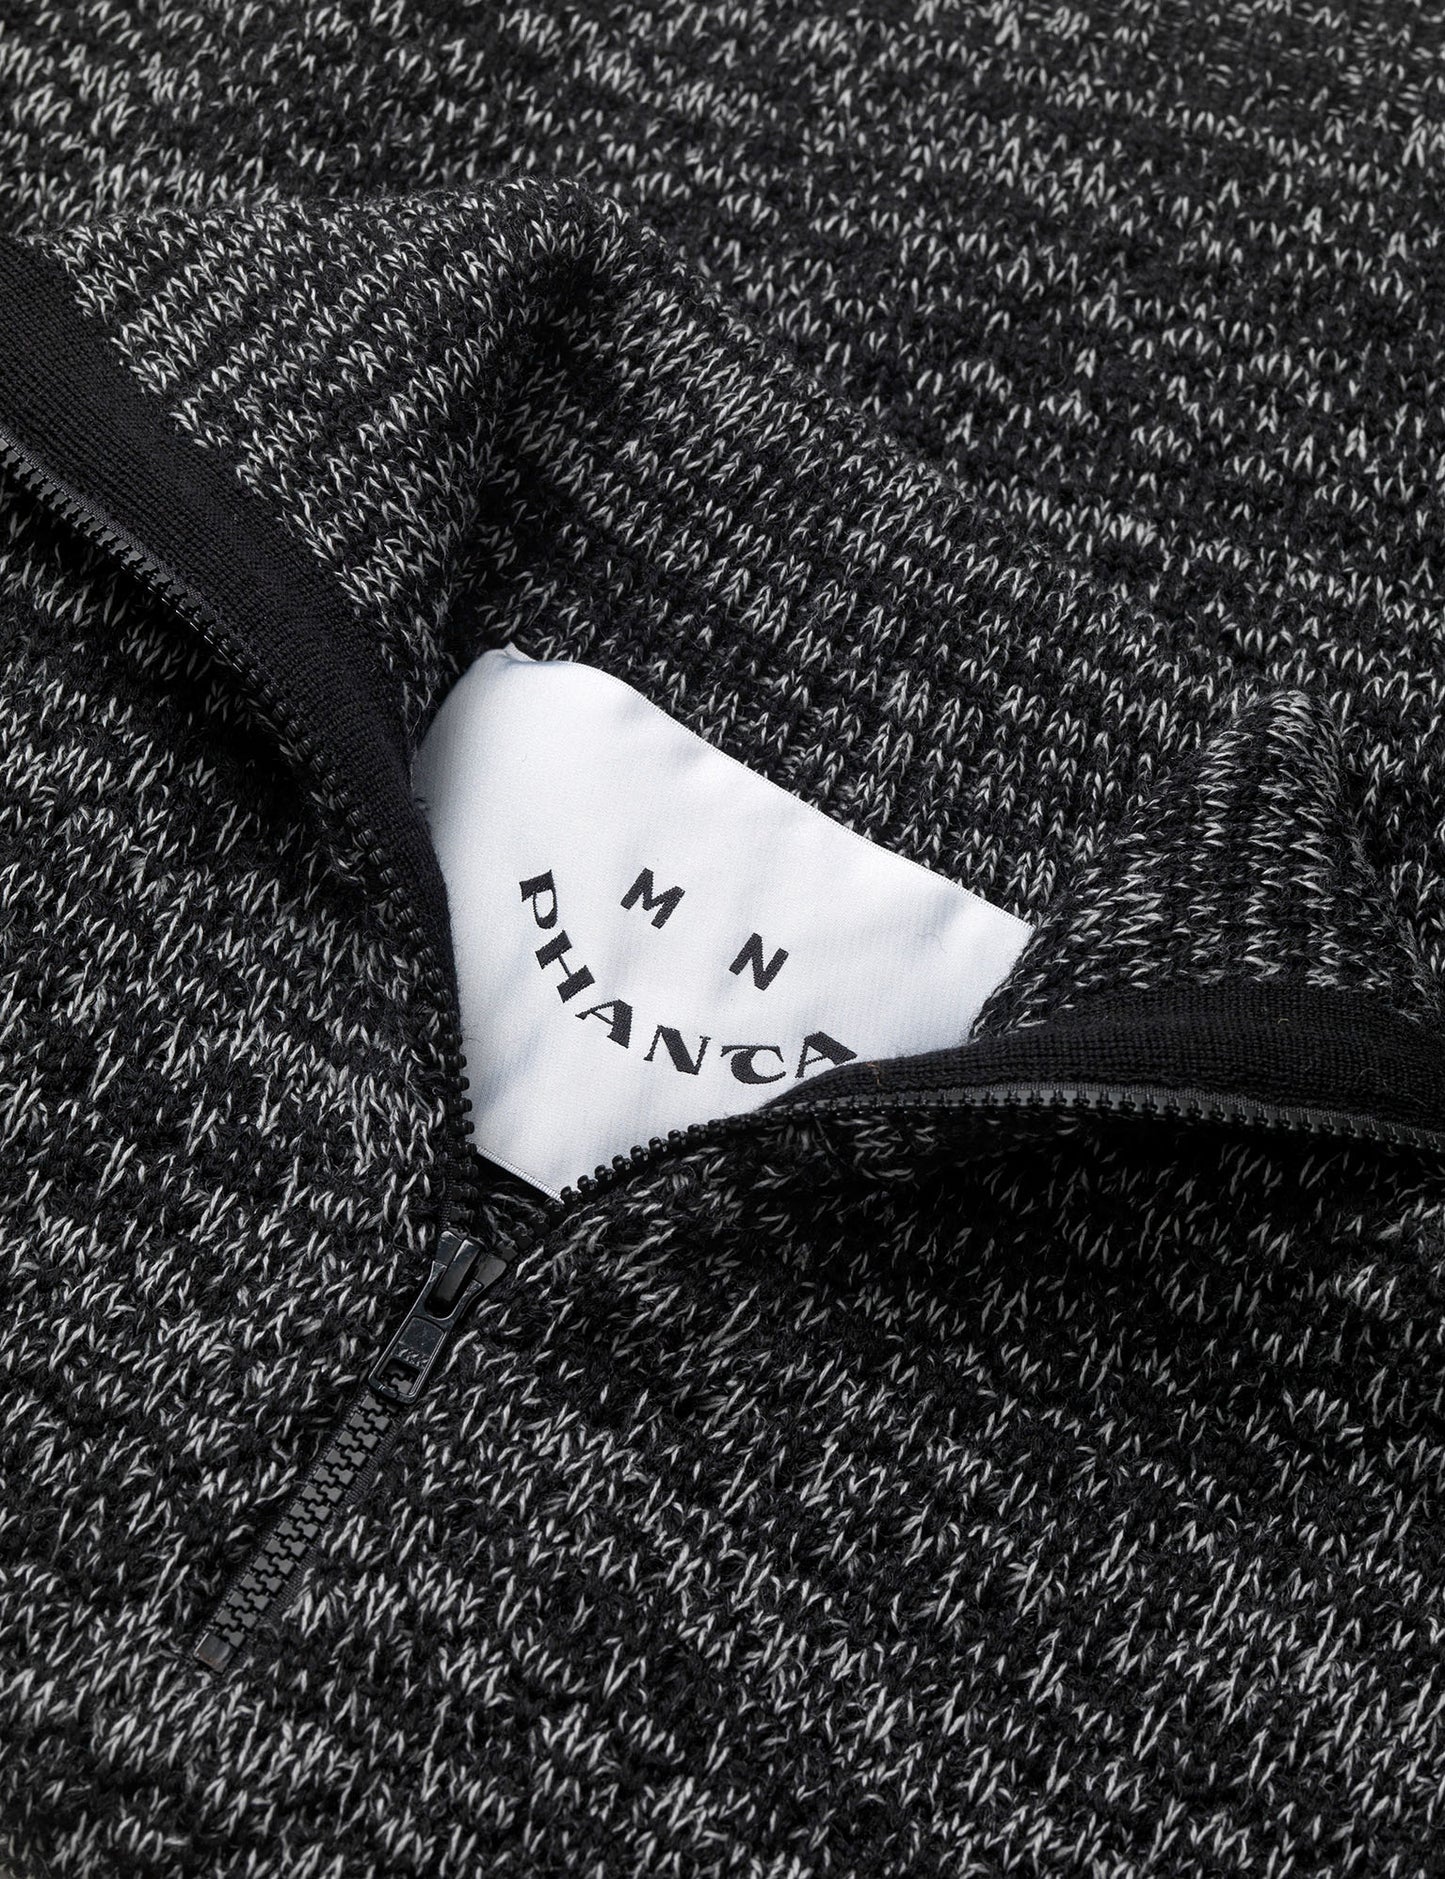 100% Wool Udo Sweater, Black/Off White